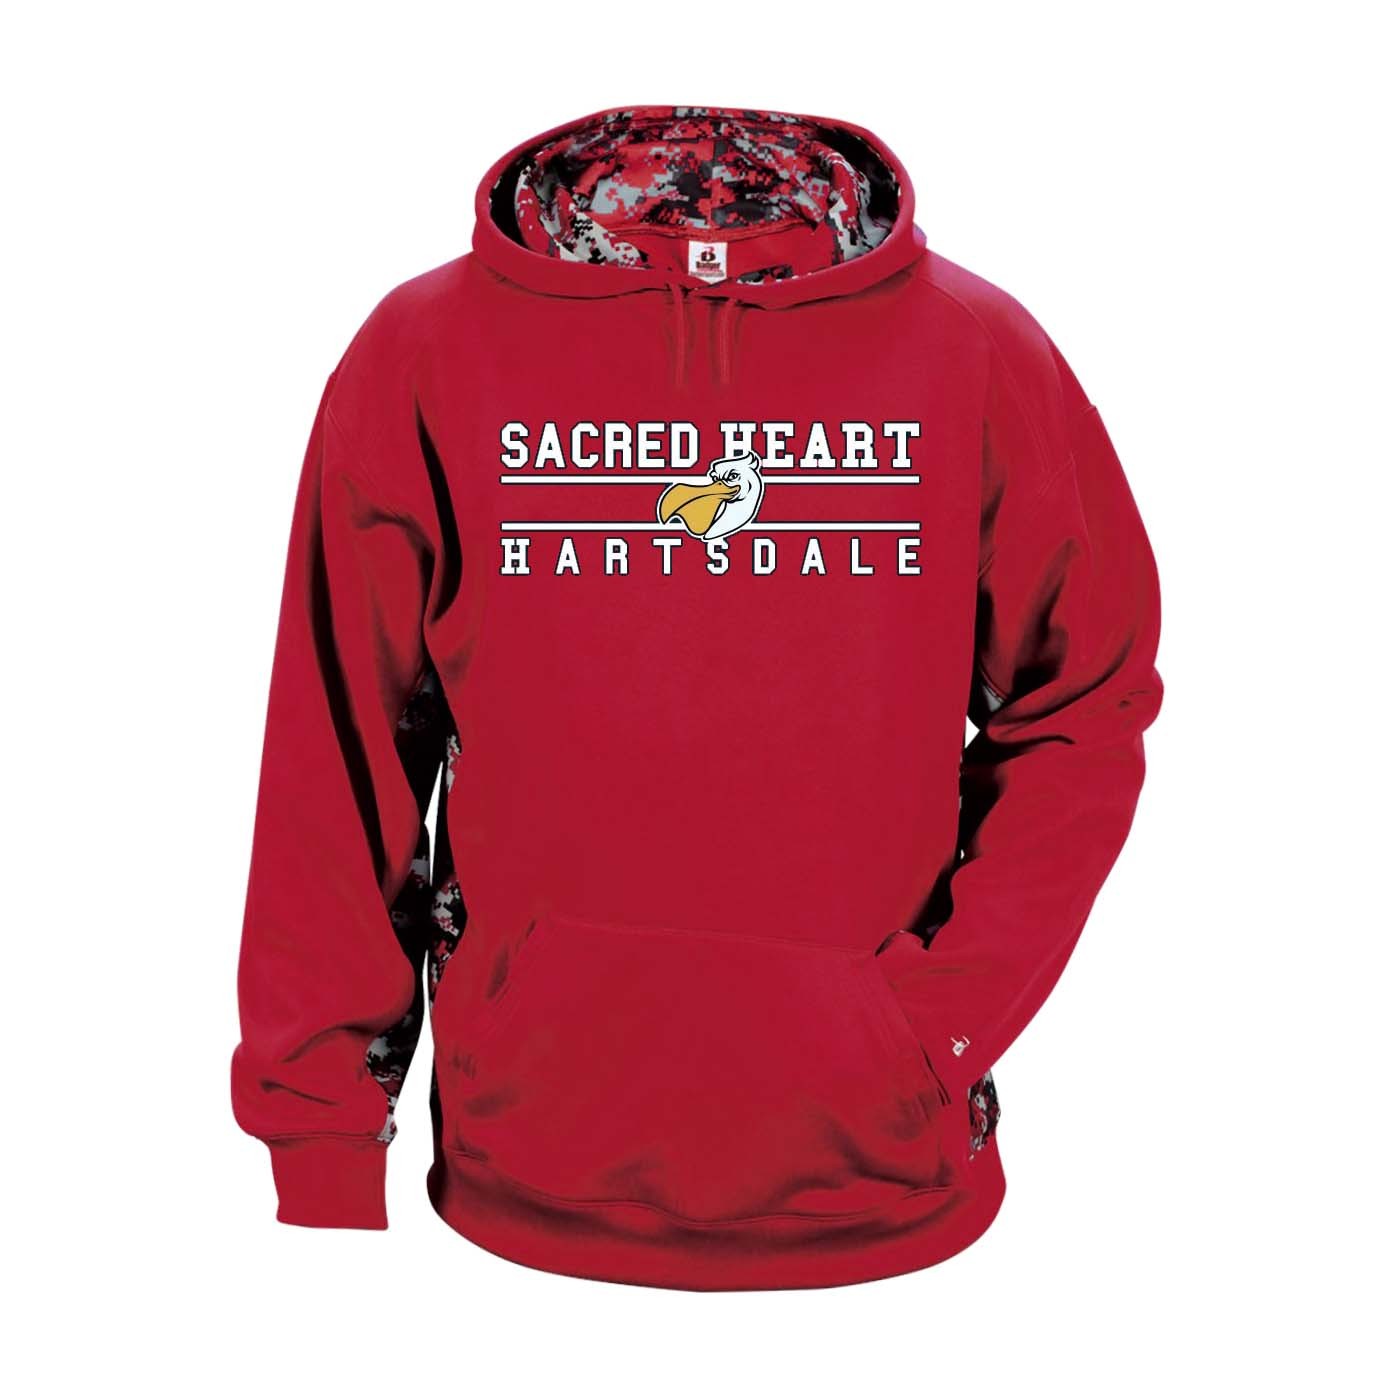 SHS Spirit Digital Camo Pullover Hoodie w/ Logo #40-42 - Please Allow 3-4 Weeks for Delivery